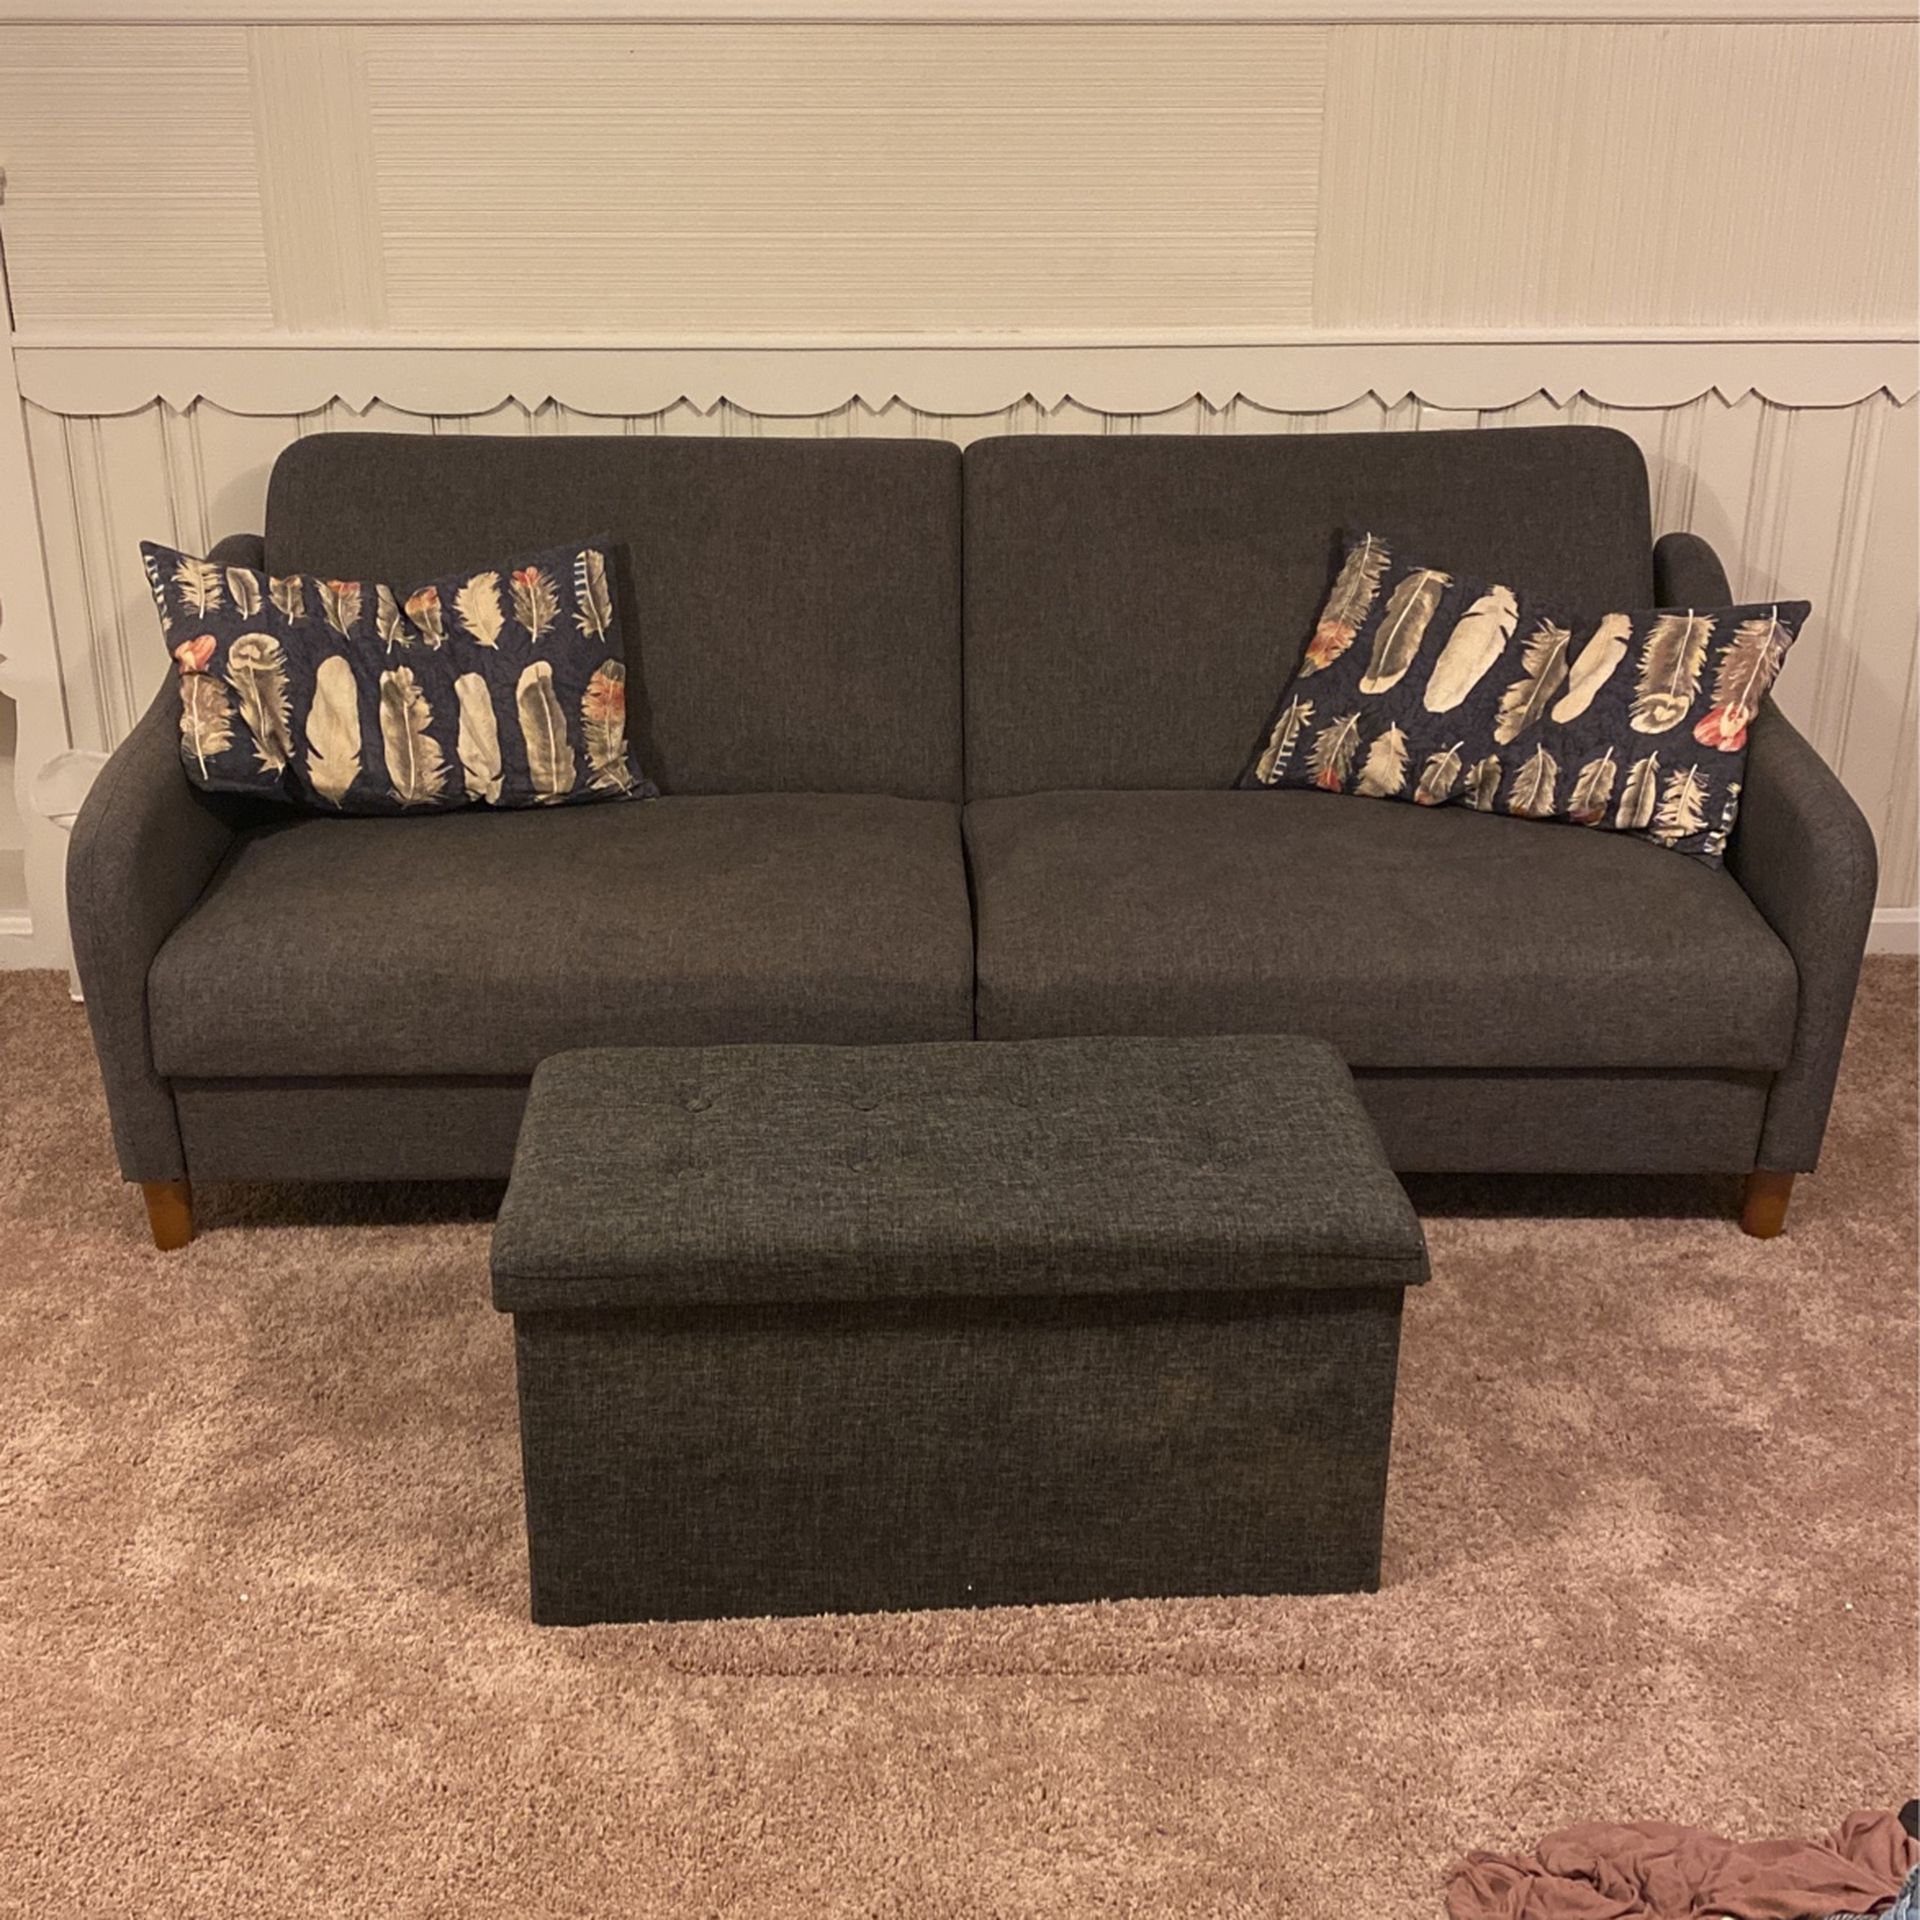 Fabric Couch W/ Pillows And Storage Ottoman 